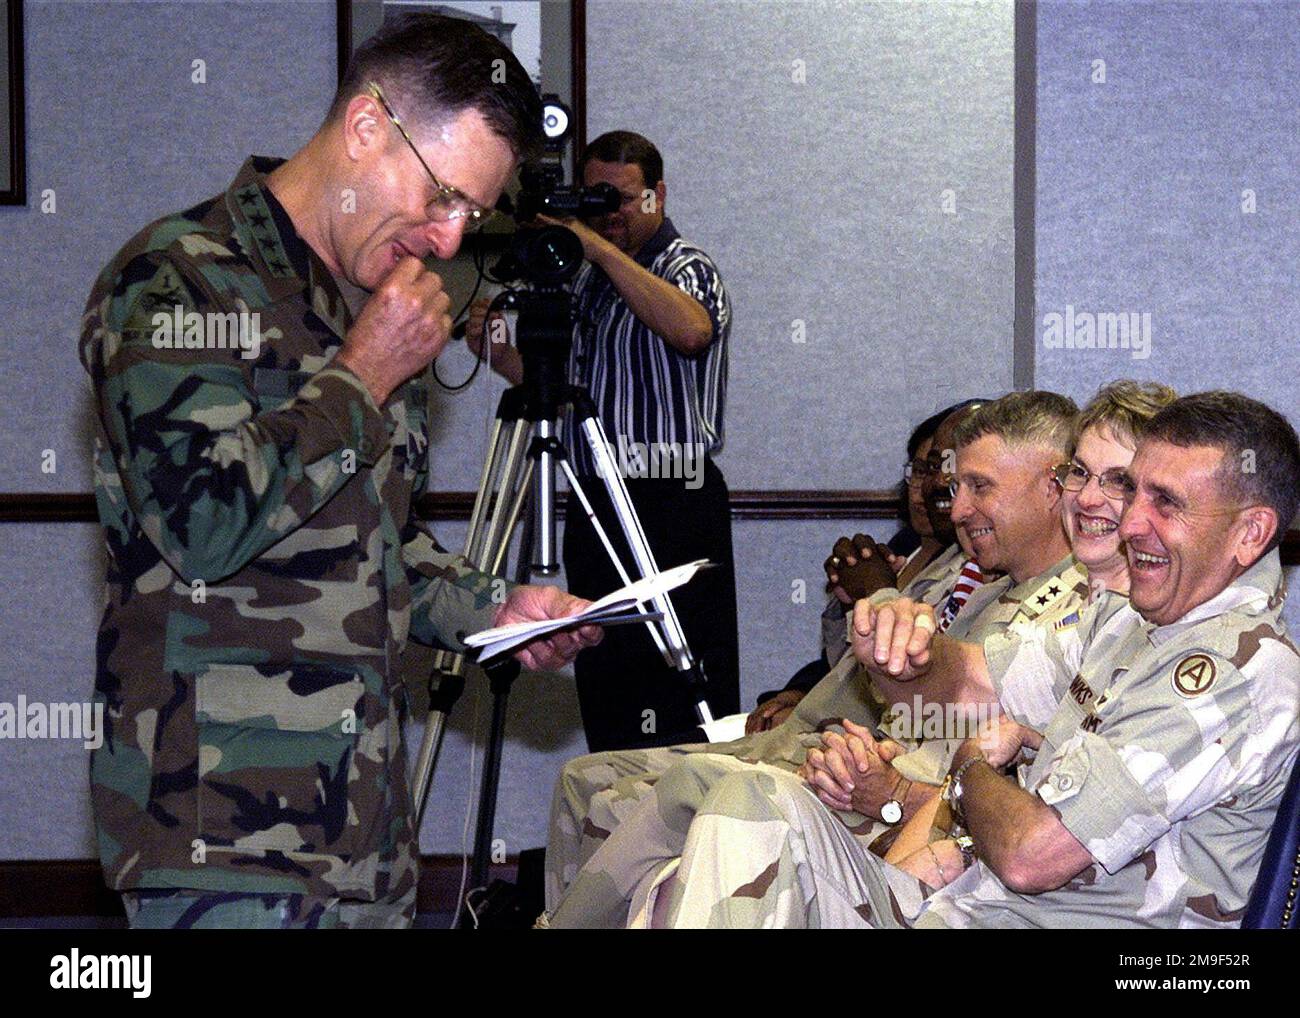 Phil Manson, Videographer, captures a humorous moment between US Army General John W. Hendrix (left), Commander, Forces Command, and (left from foreground to background) USA Lieutenant General Tommy R. Franks, Commander, Third Army, and his wife, USA Major General Edwards, Deputy Commanding General, Third Army, USA Command Sergeant Major Robert Brown, Command Sergeant Major Third Army and his wife, during an awards ceremony at the Third Army Headquarters at Fort McPherson, Georgia. Base: Fort Mcpherson State: Georgia (GA) Country: United States Of America (USA) Stock Photo